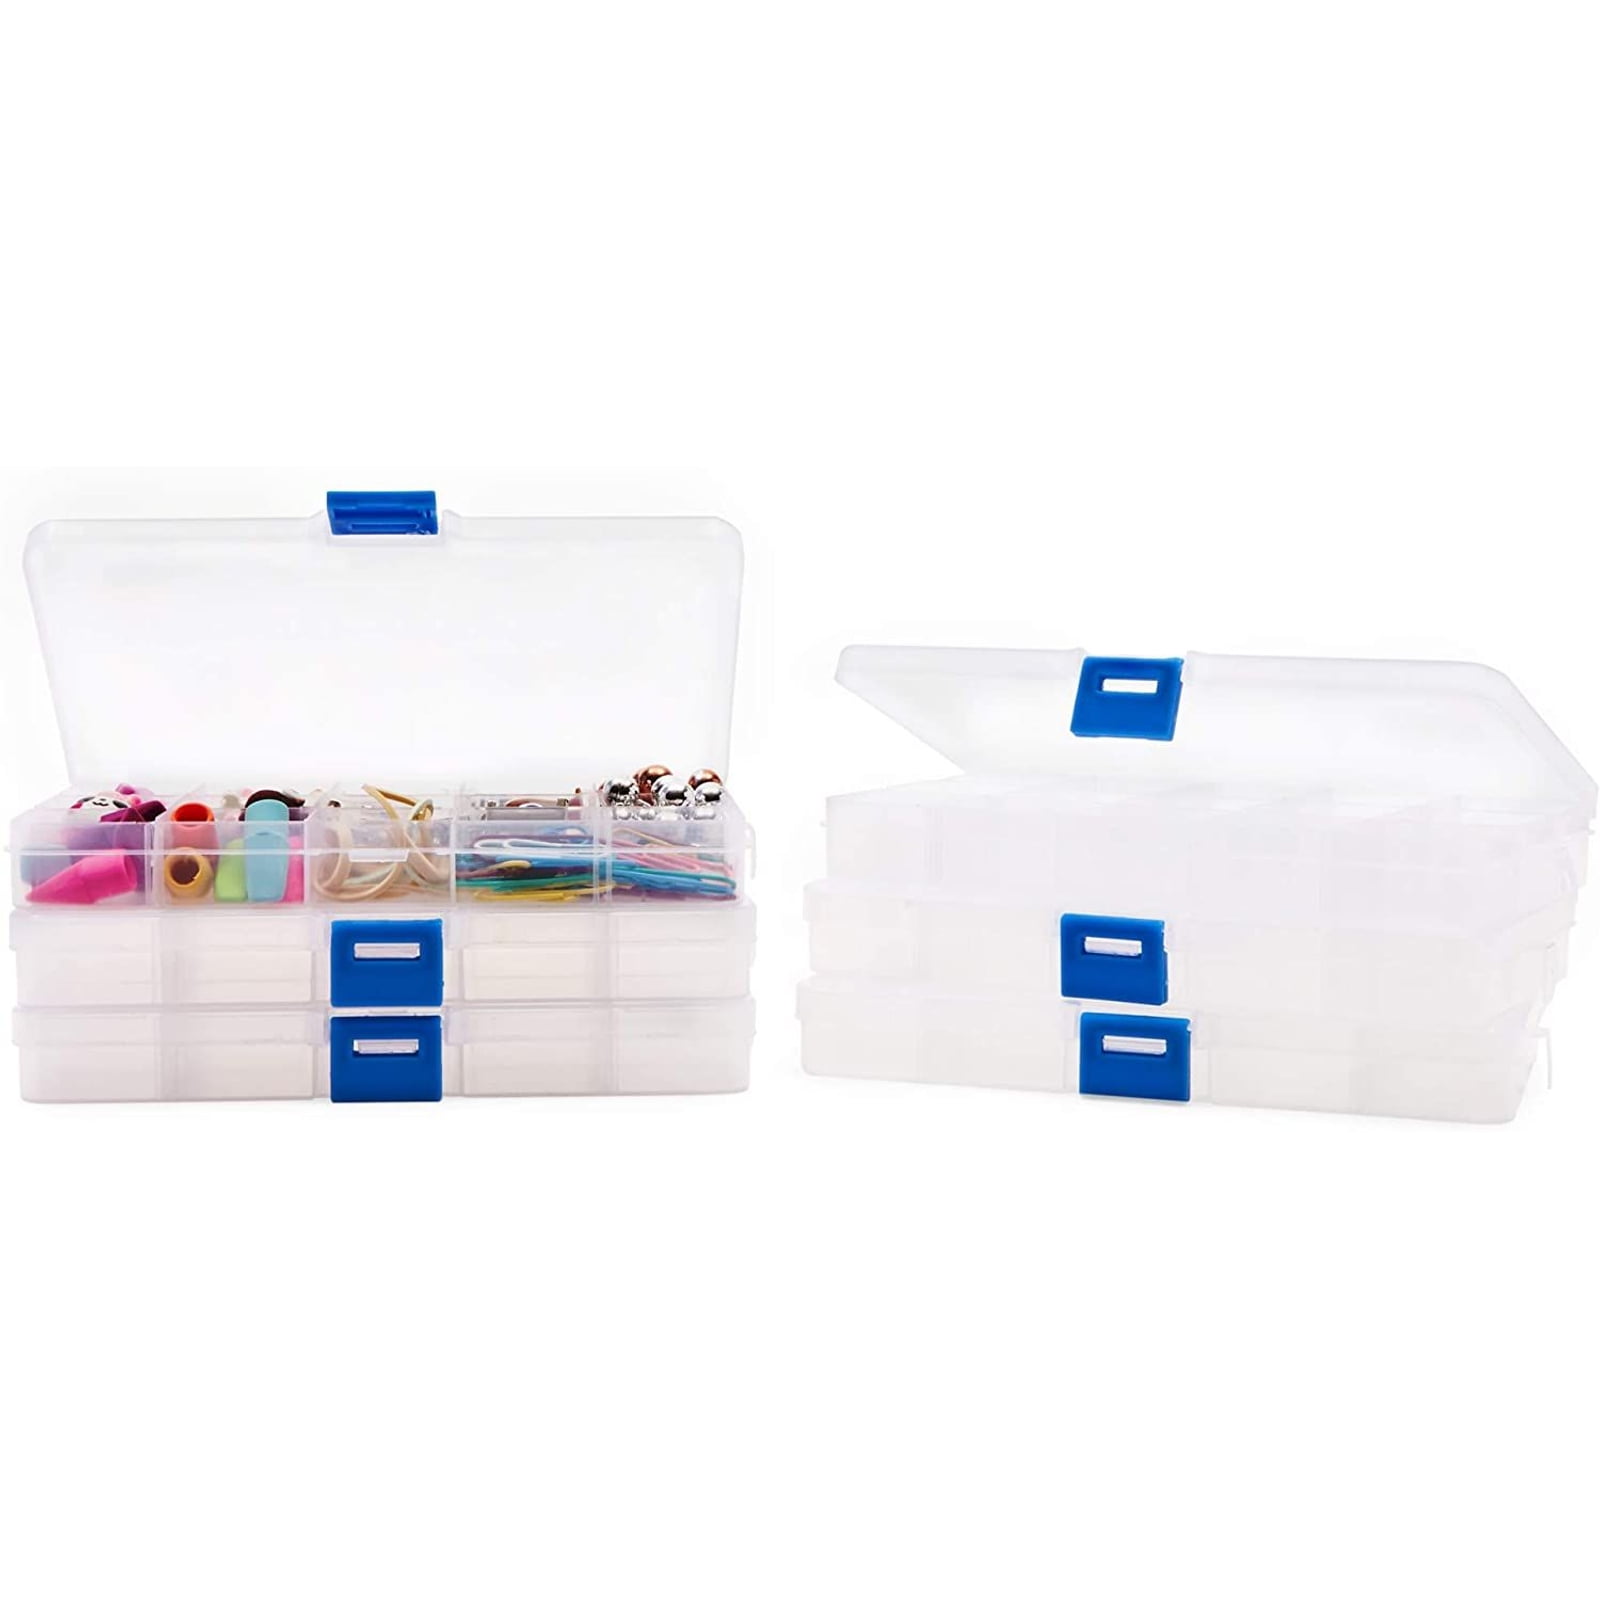 JIeGuanG Clear Jewelry Box Multi Colors 4 Pcs Plastic Adjustable Dividers Bead Earring Storage Organizer 